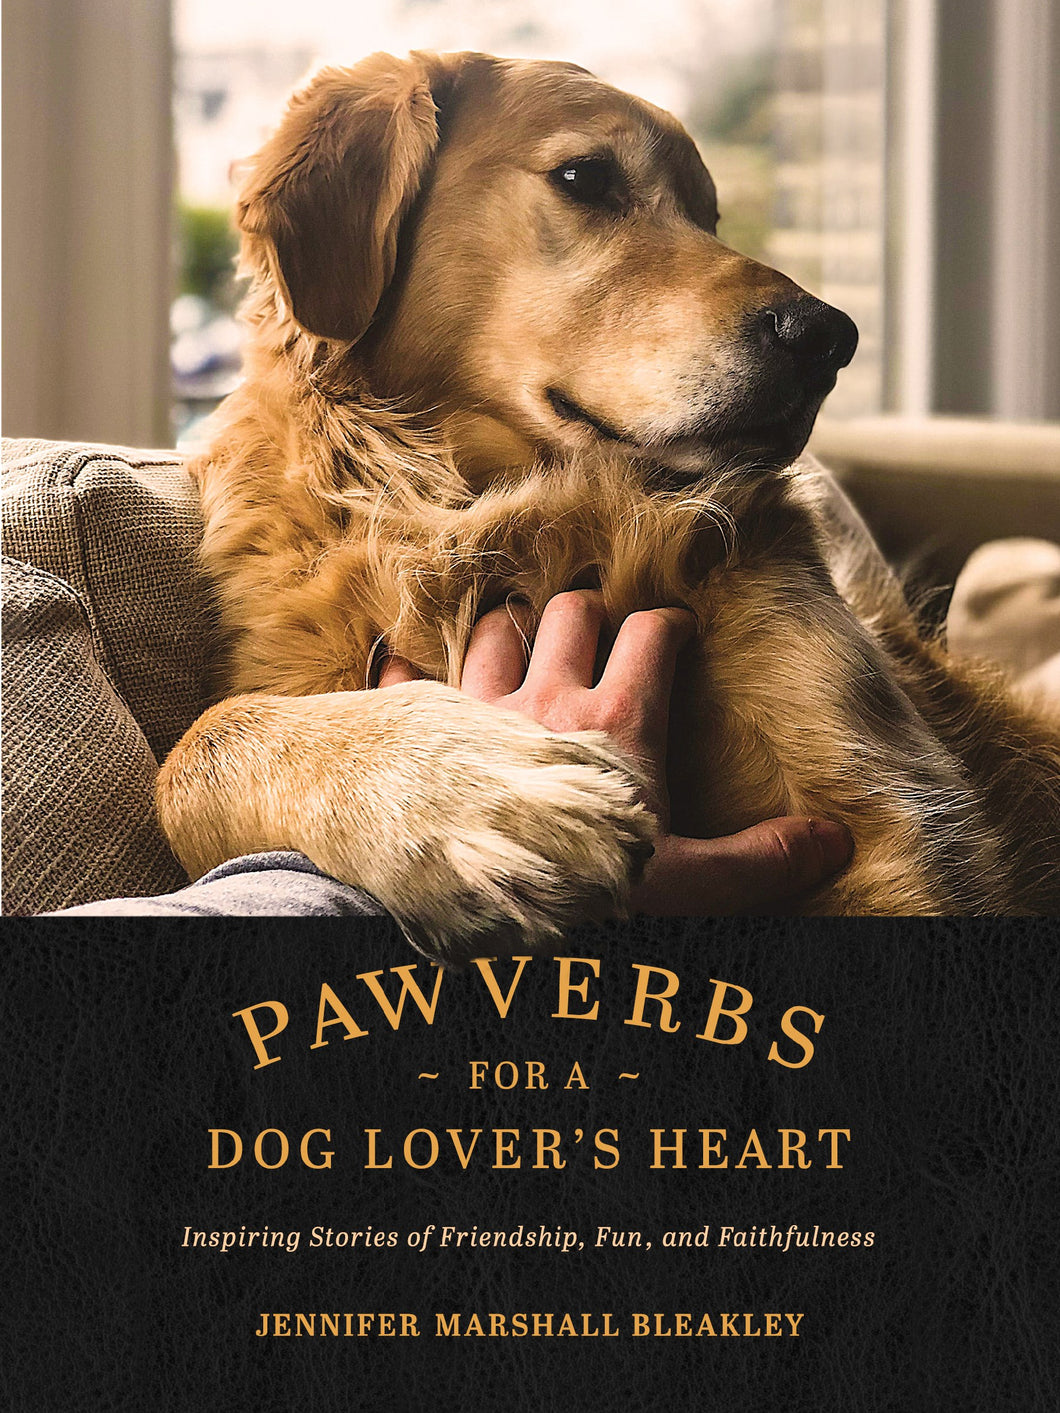 Pawverbs For A Dog Lover's Heart